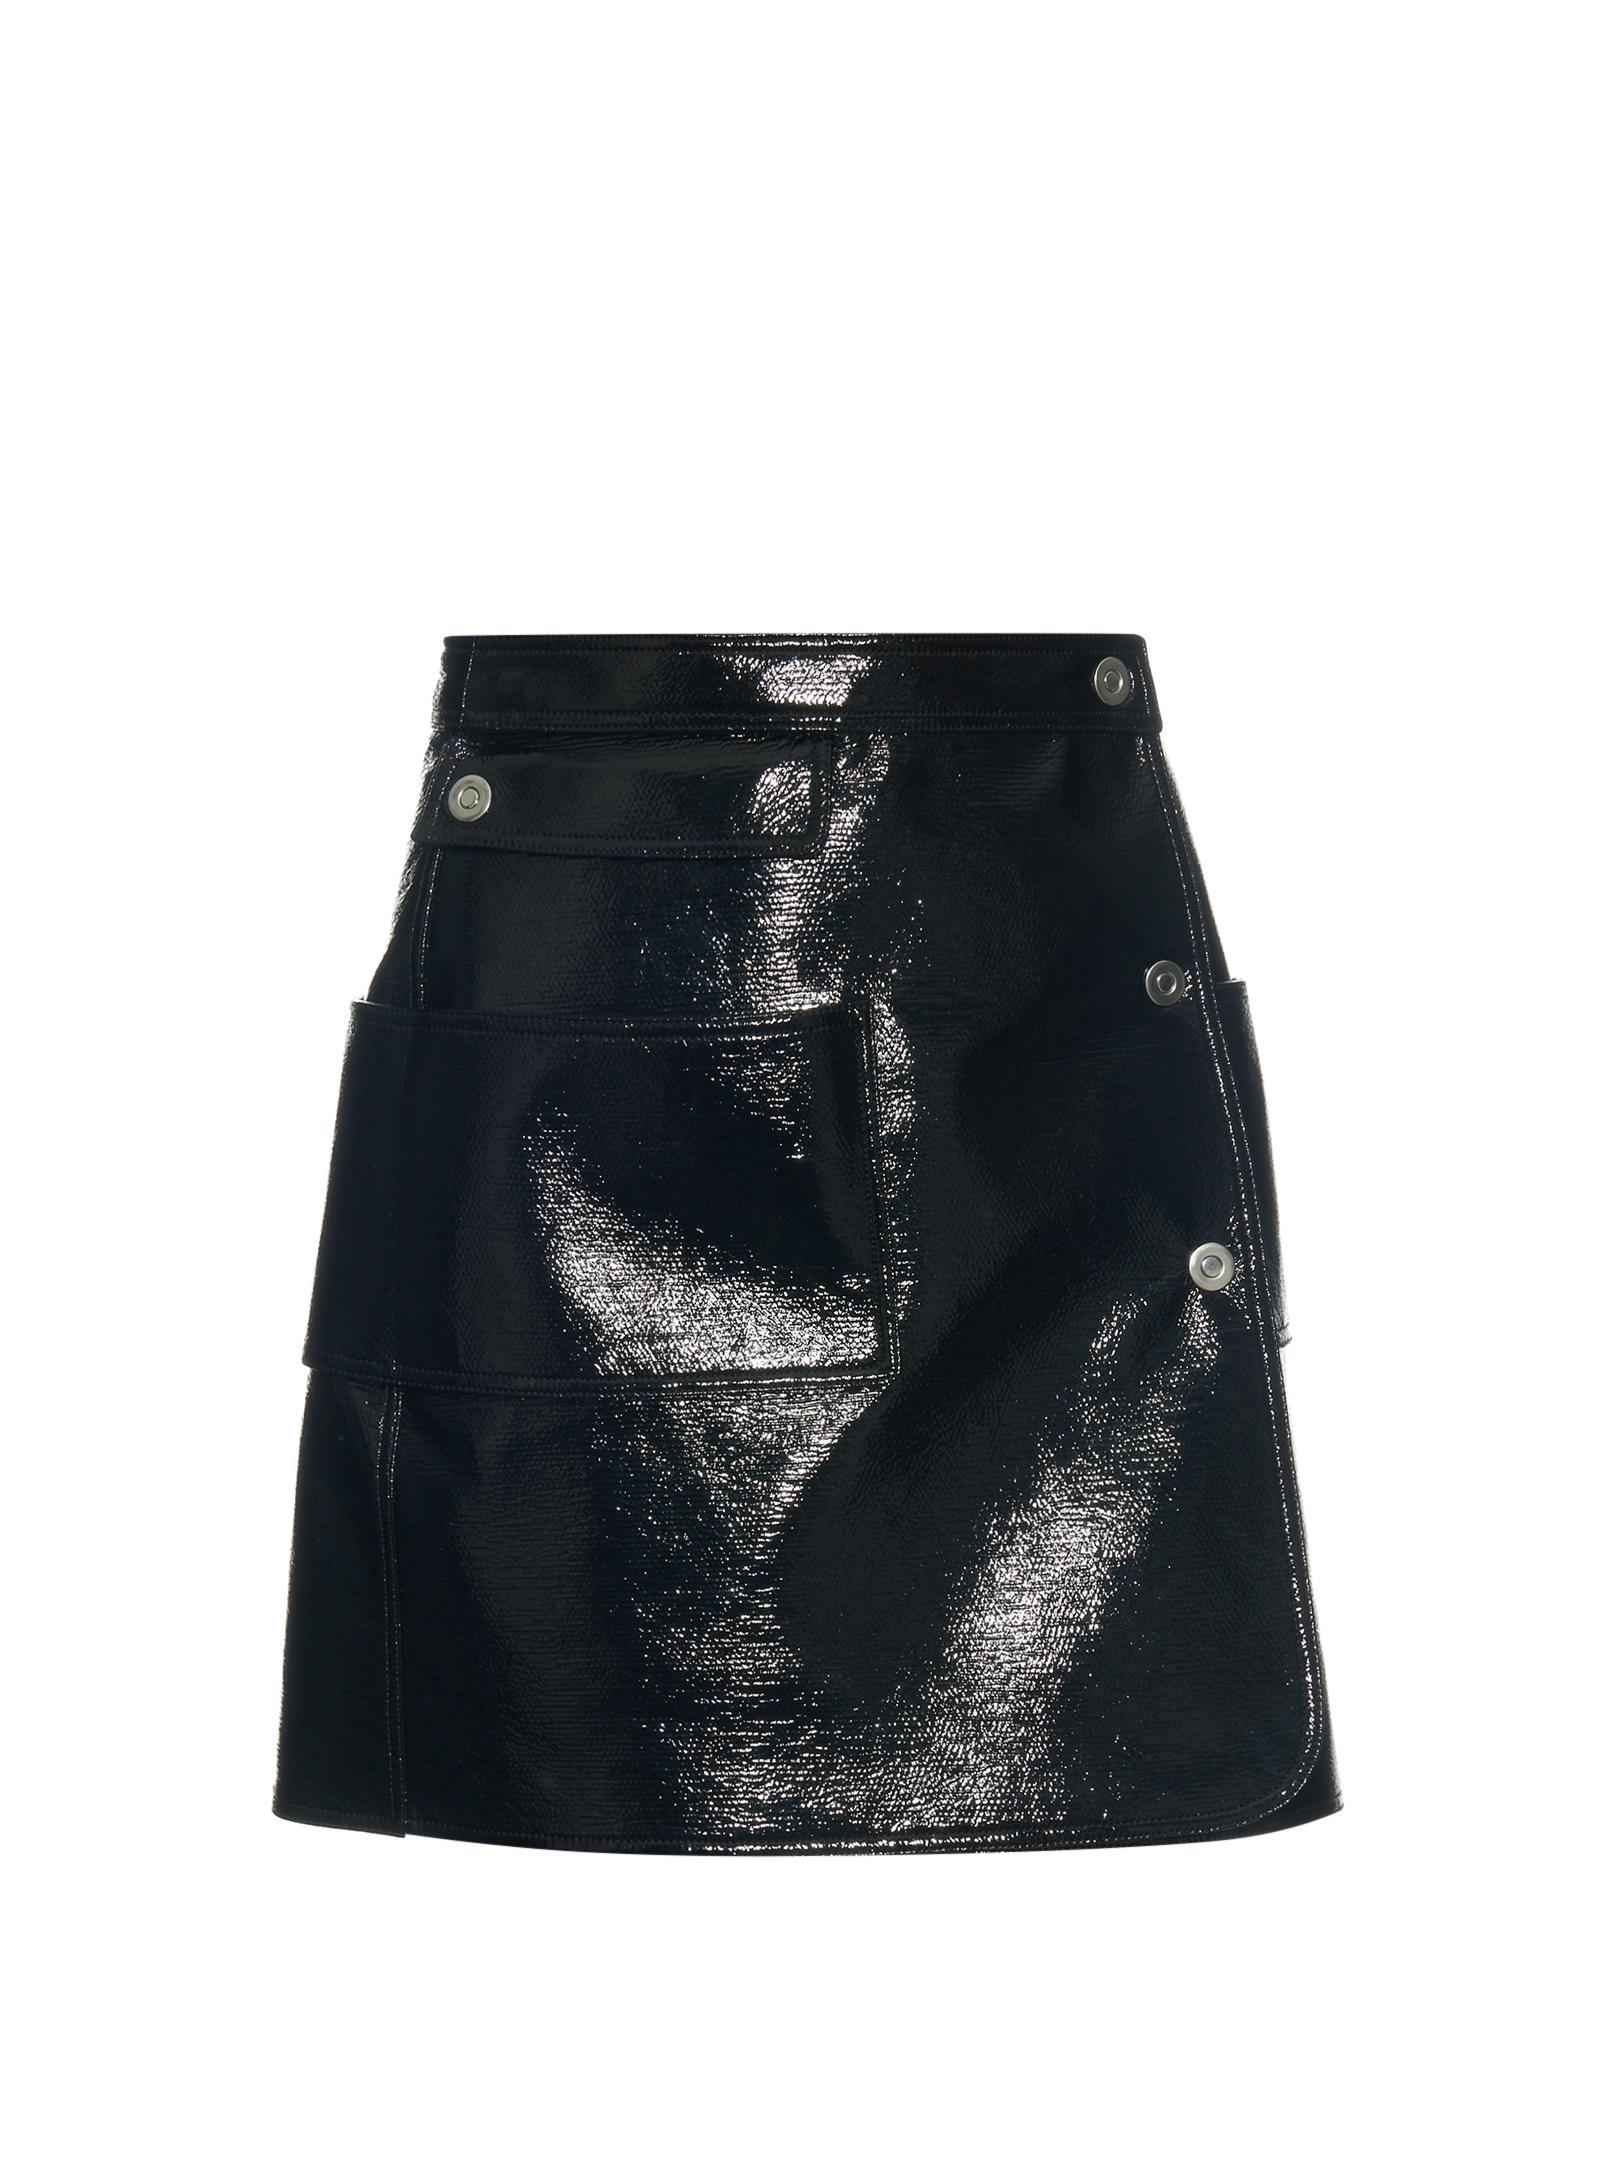 Courreges Patent-leather Mini Skirt in Black | Lyst